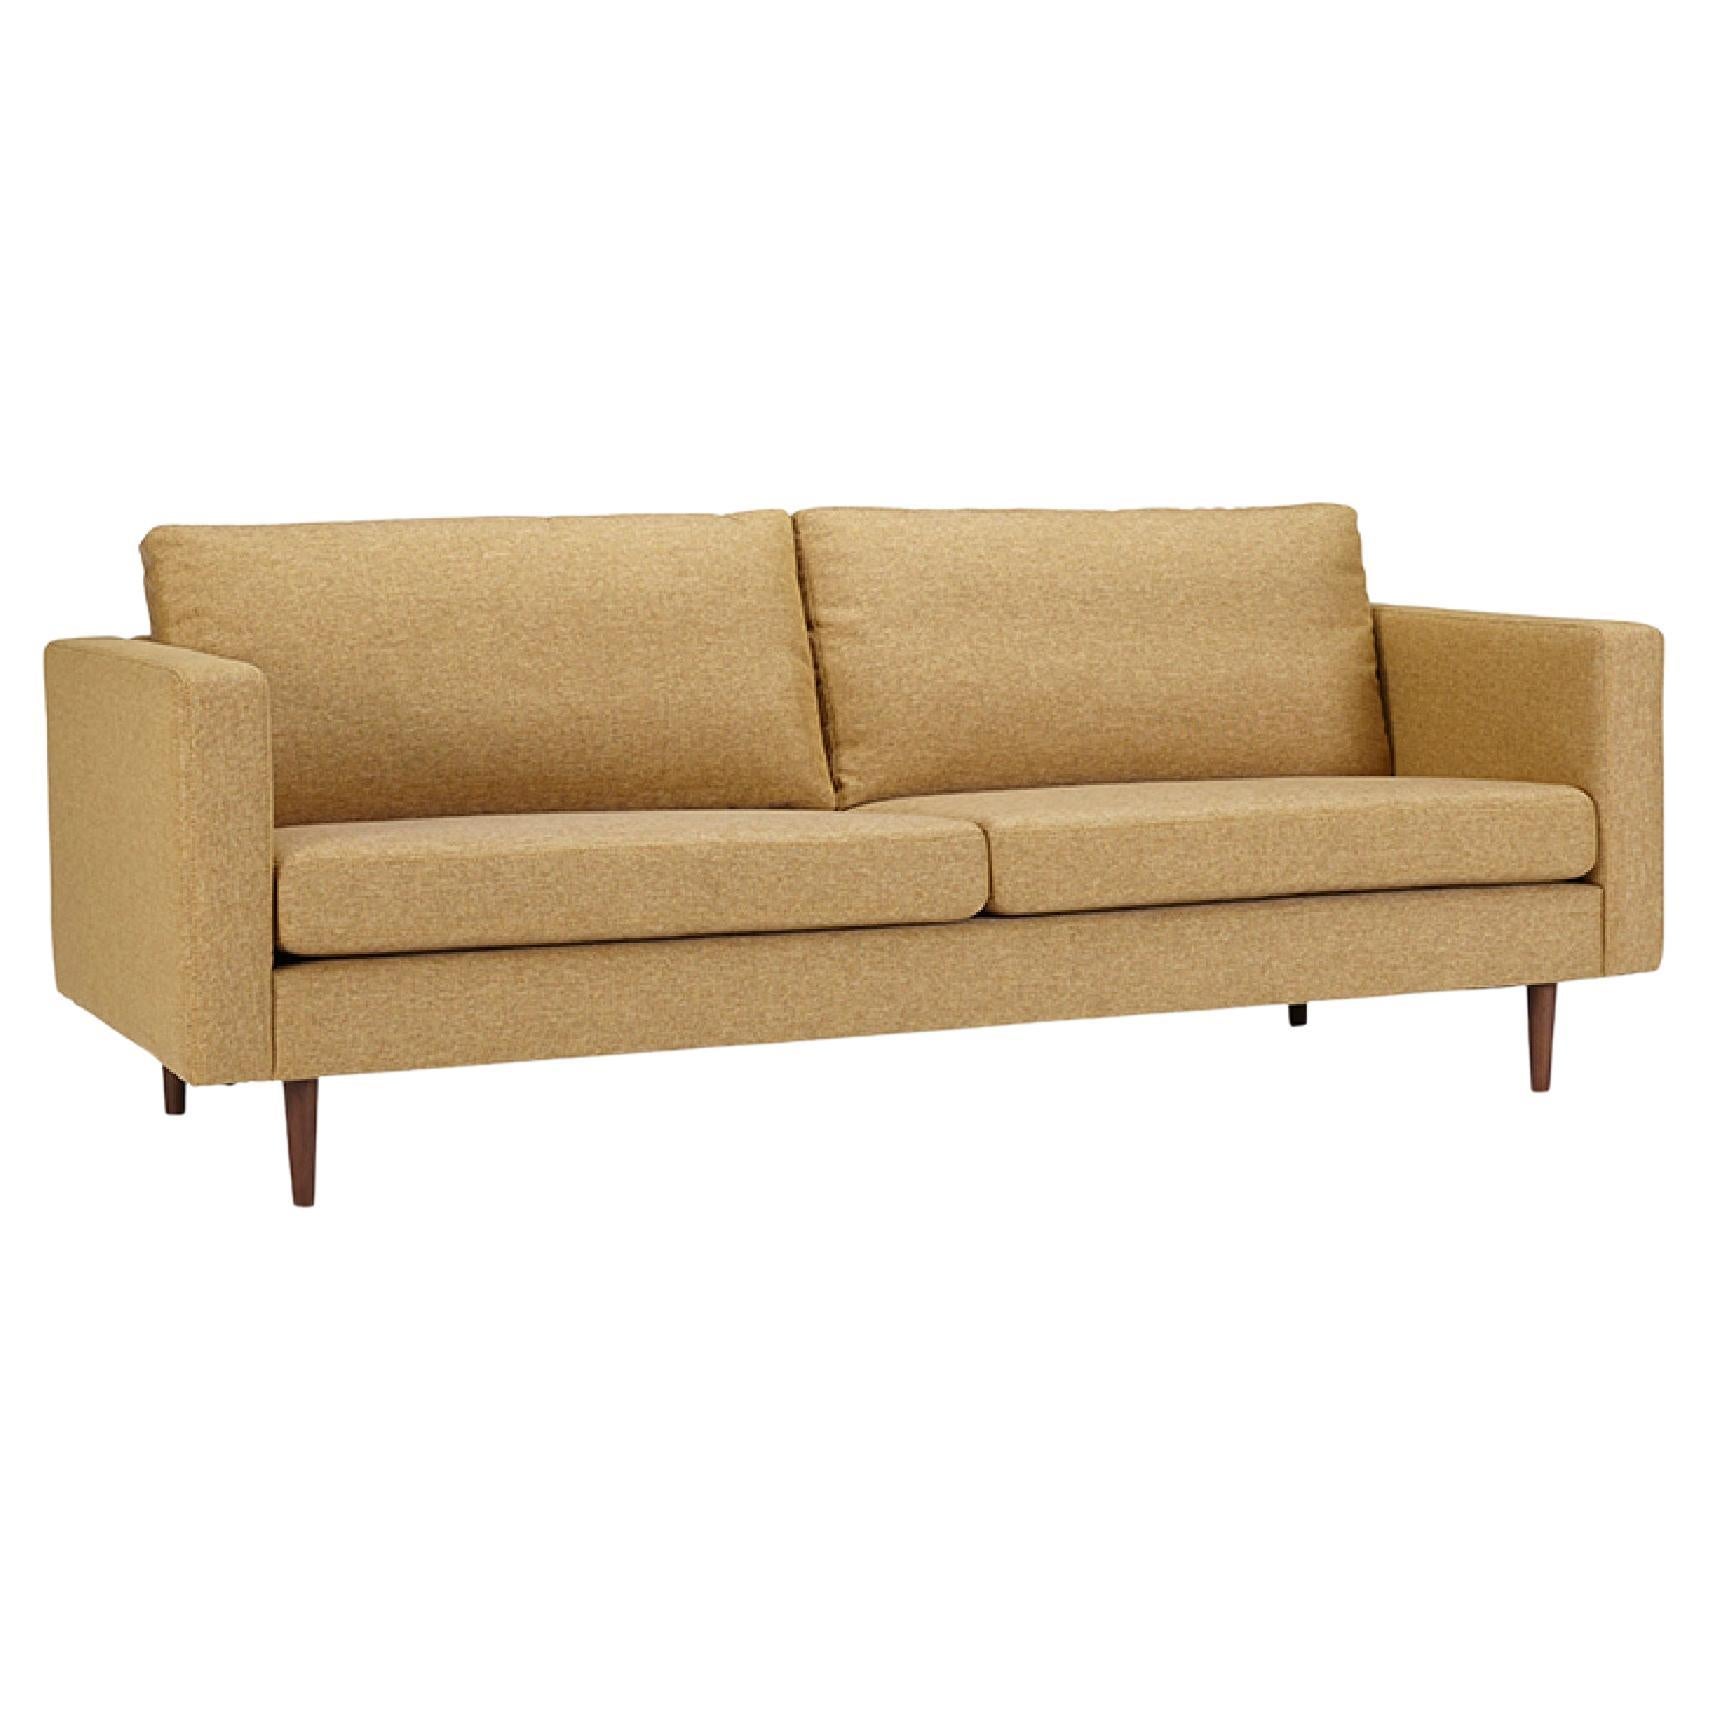  Hayche Clasico 3 Seater Sofa - Yellow, UK, Made to Order For Sale